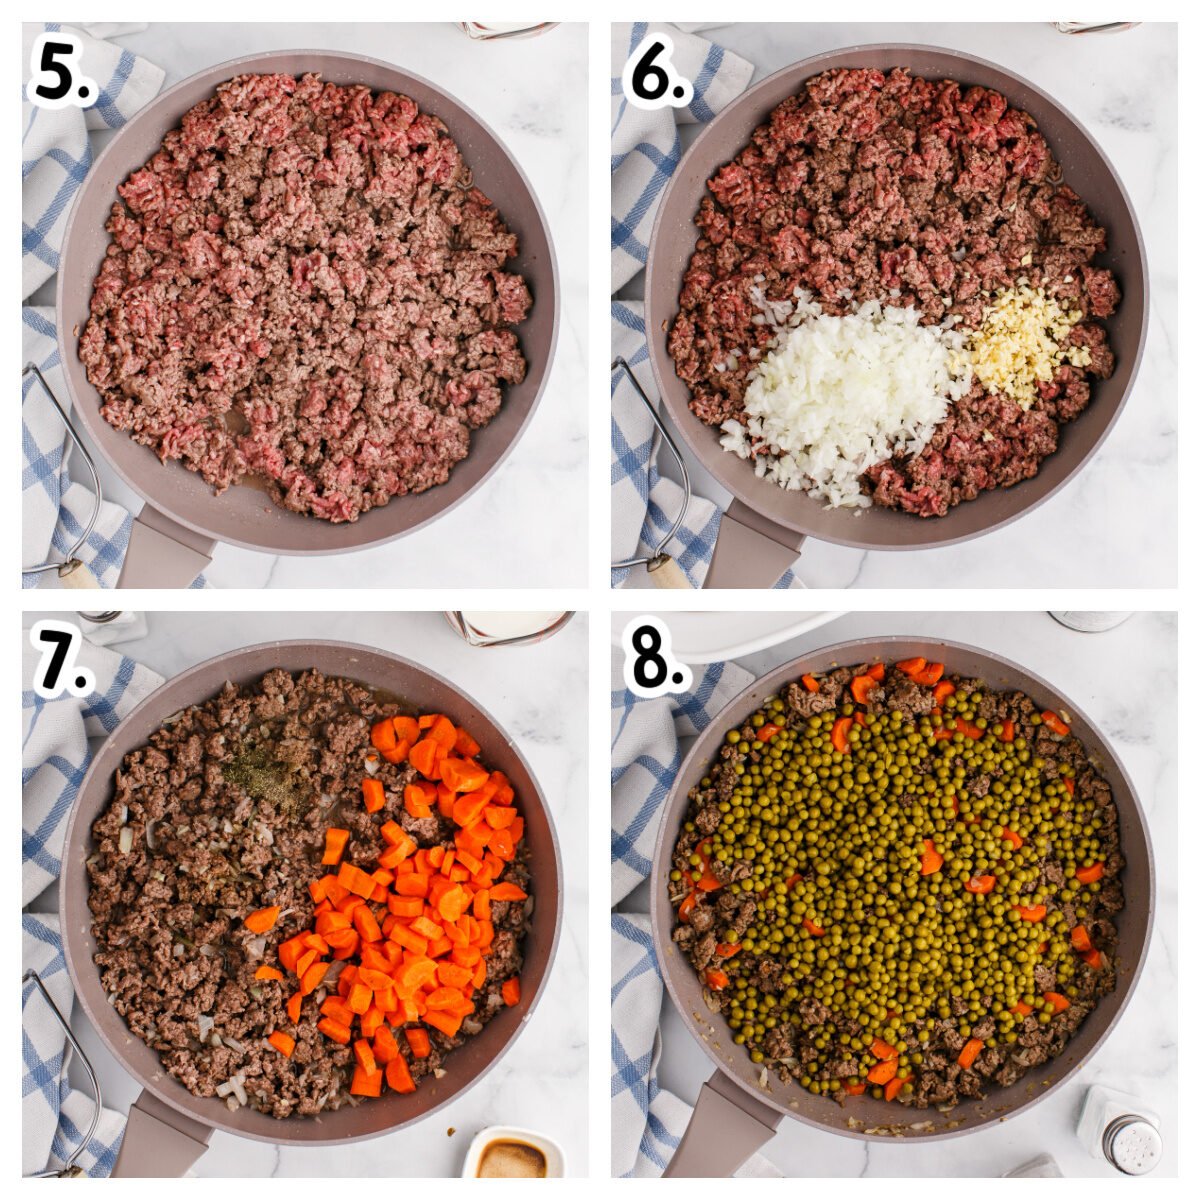 4 images showing how to make the meat filling for shepherd's pie.